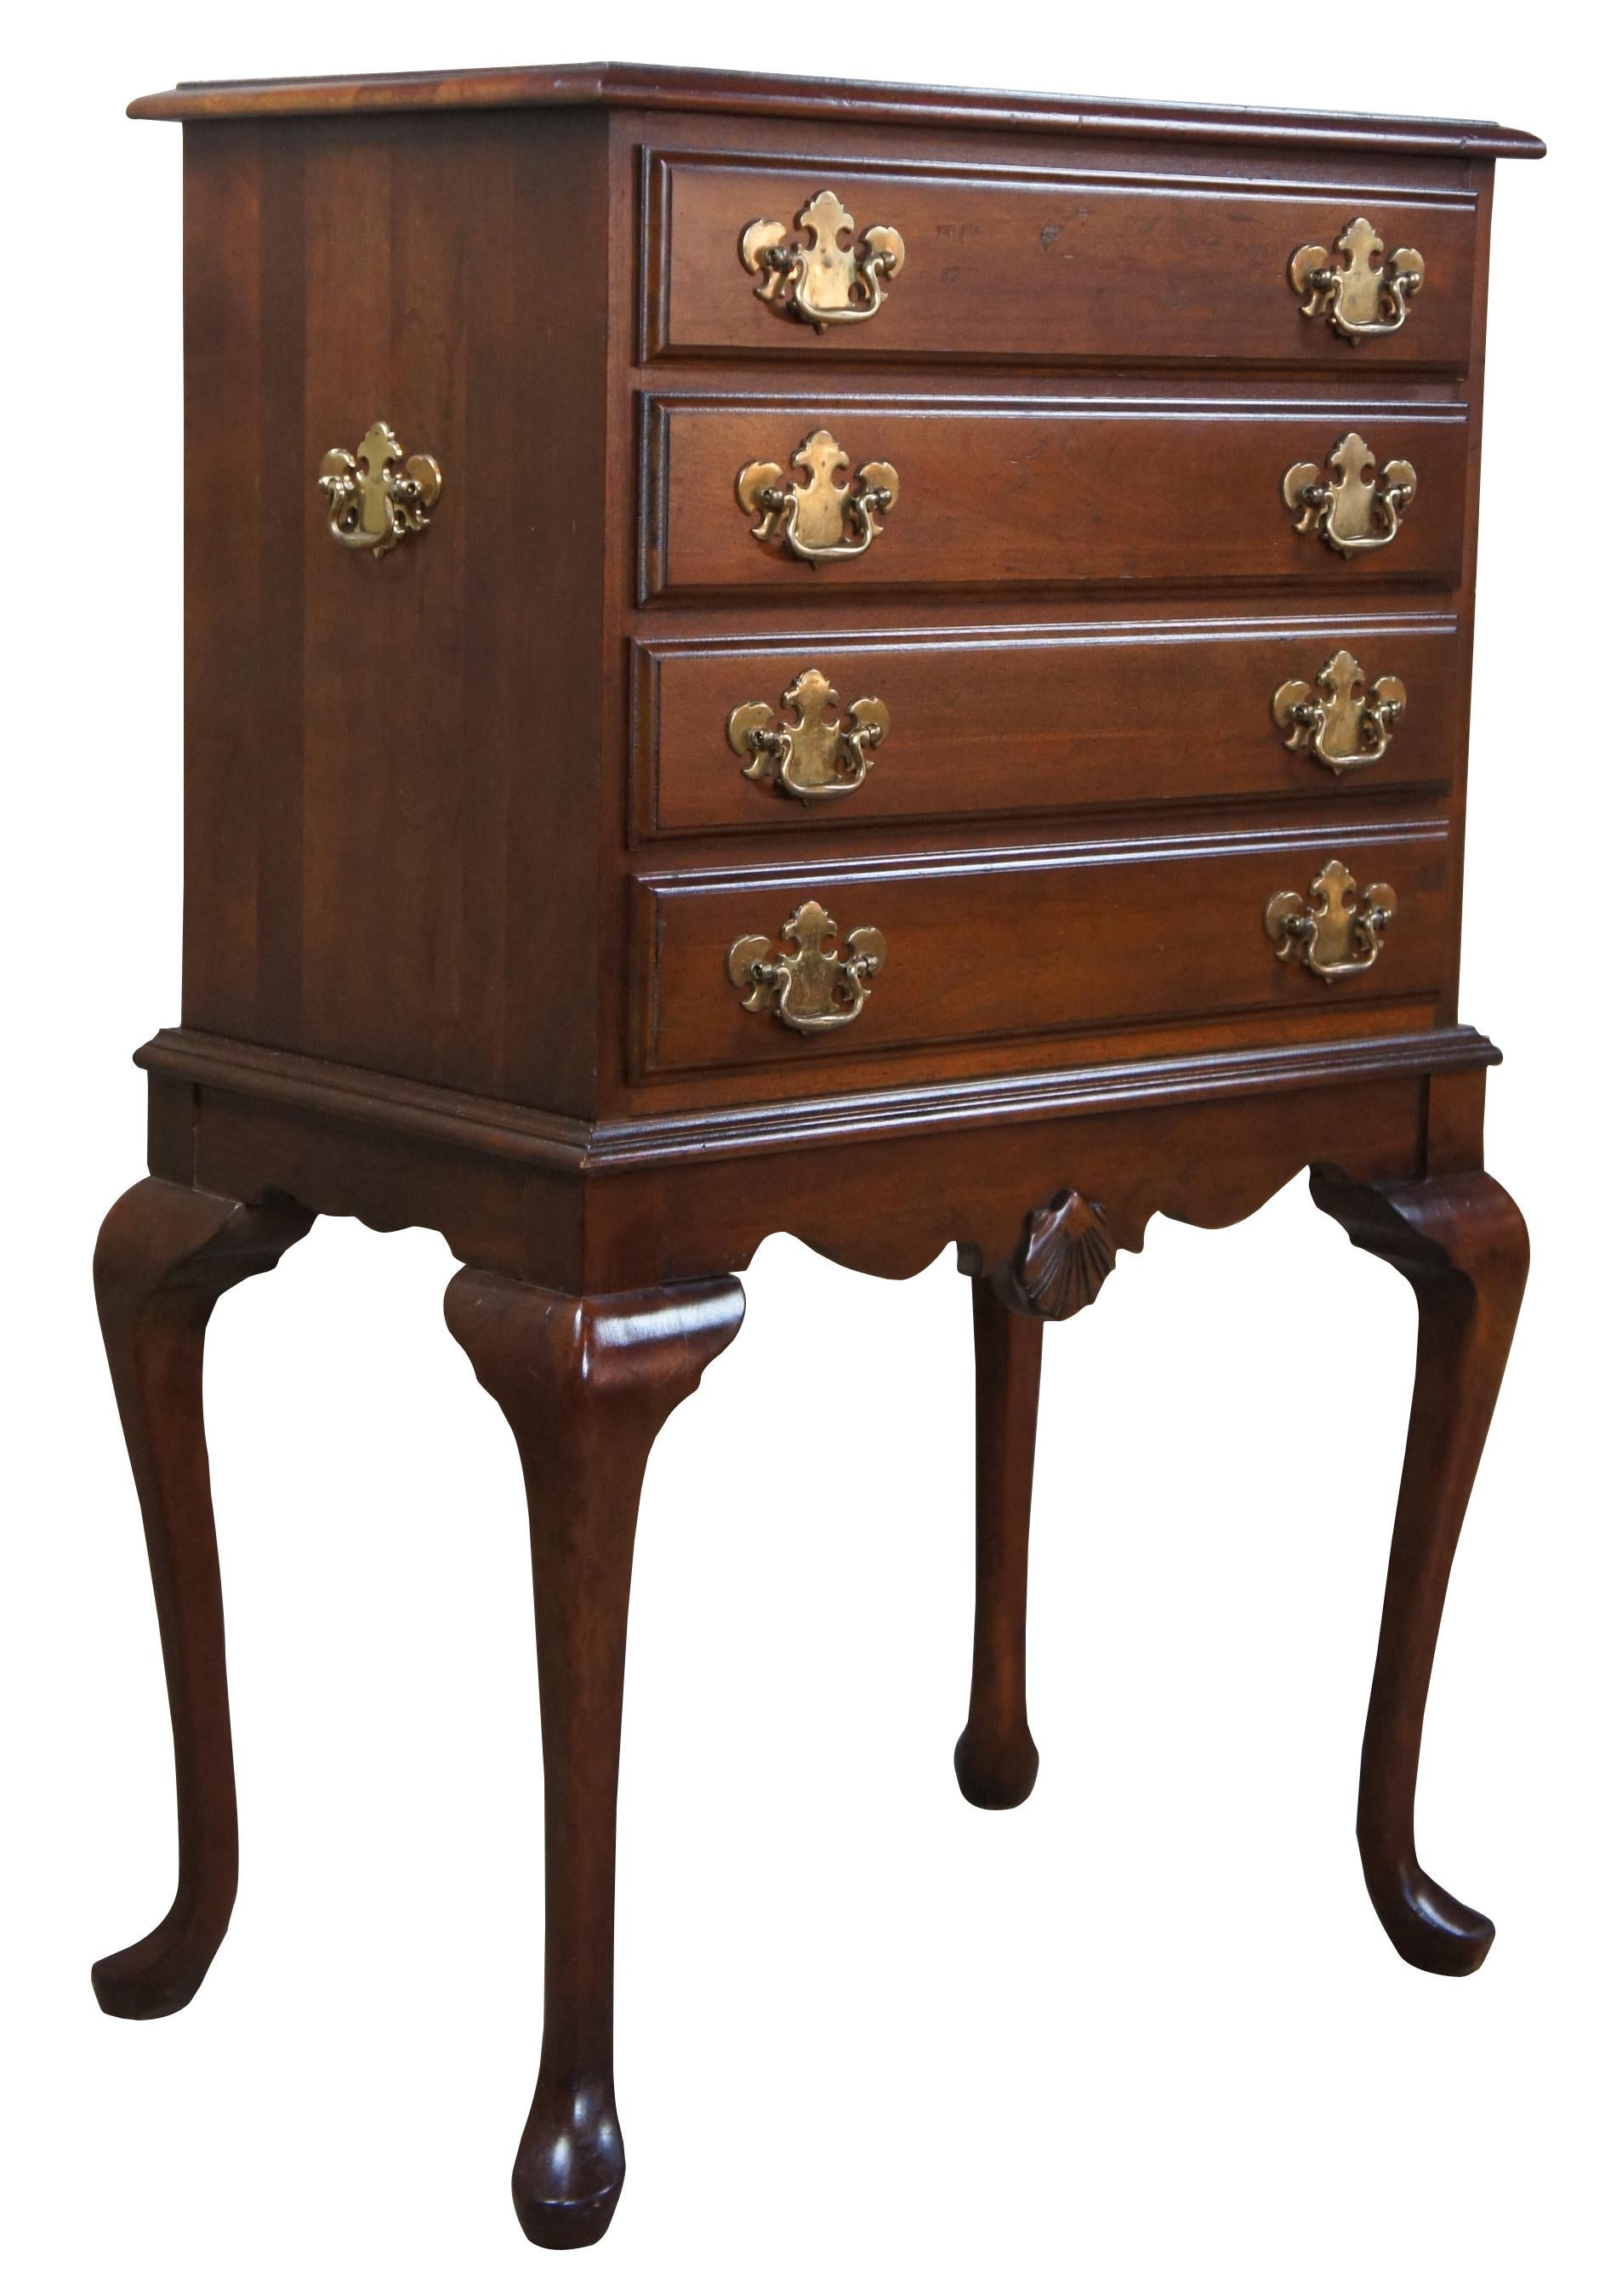 Late 20th century cherry Queen Anne silverware cabinet. Features four dovetailed drawers with silver wear lined cloth and brass hardware. Chest features a serpentine apron with scallop over Queen Anne legs leading to pad feet. Measure: 38